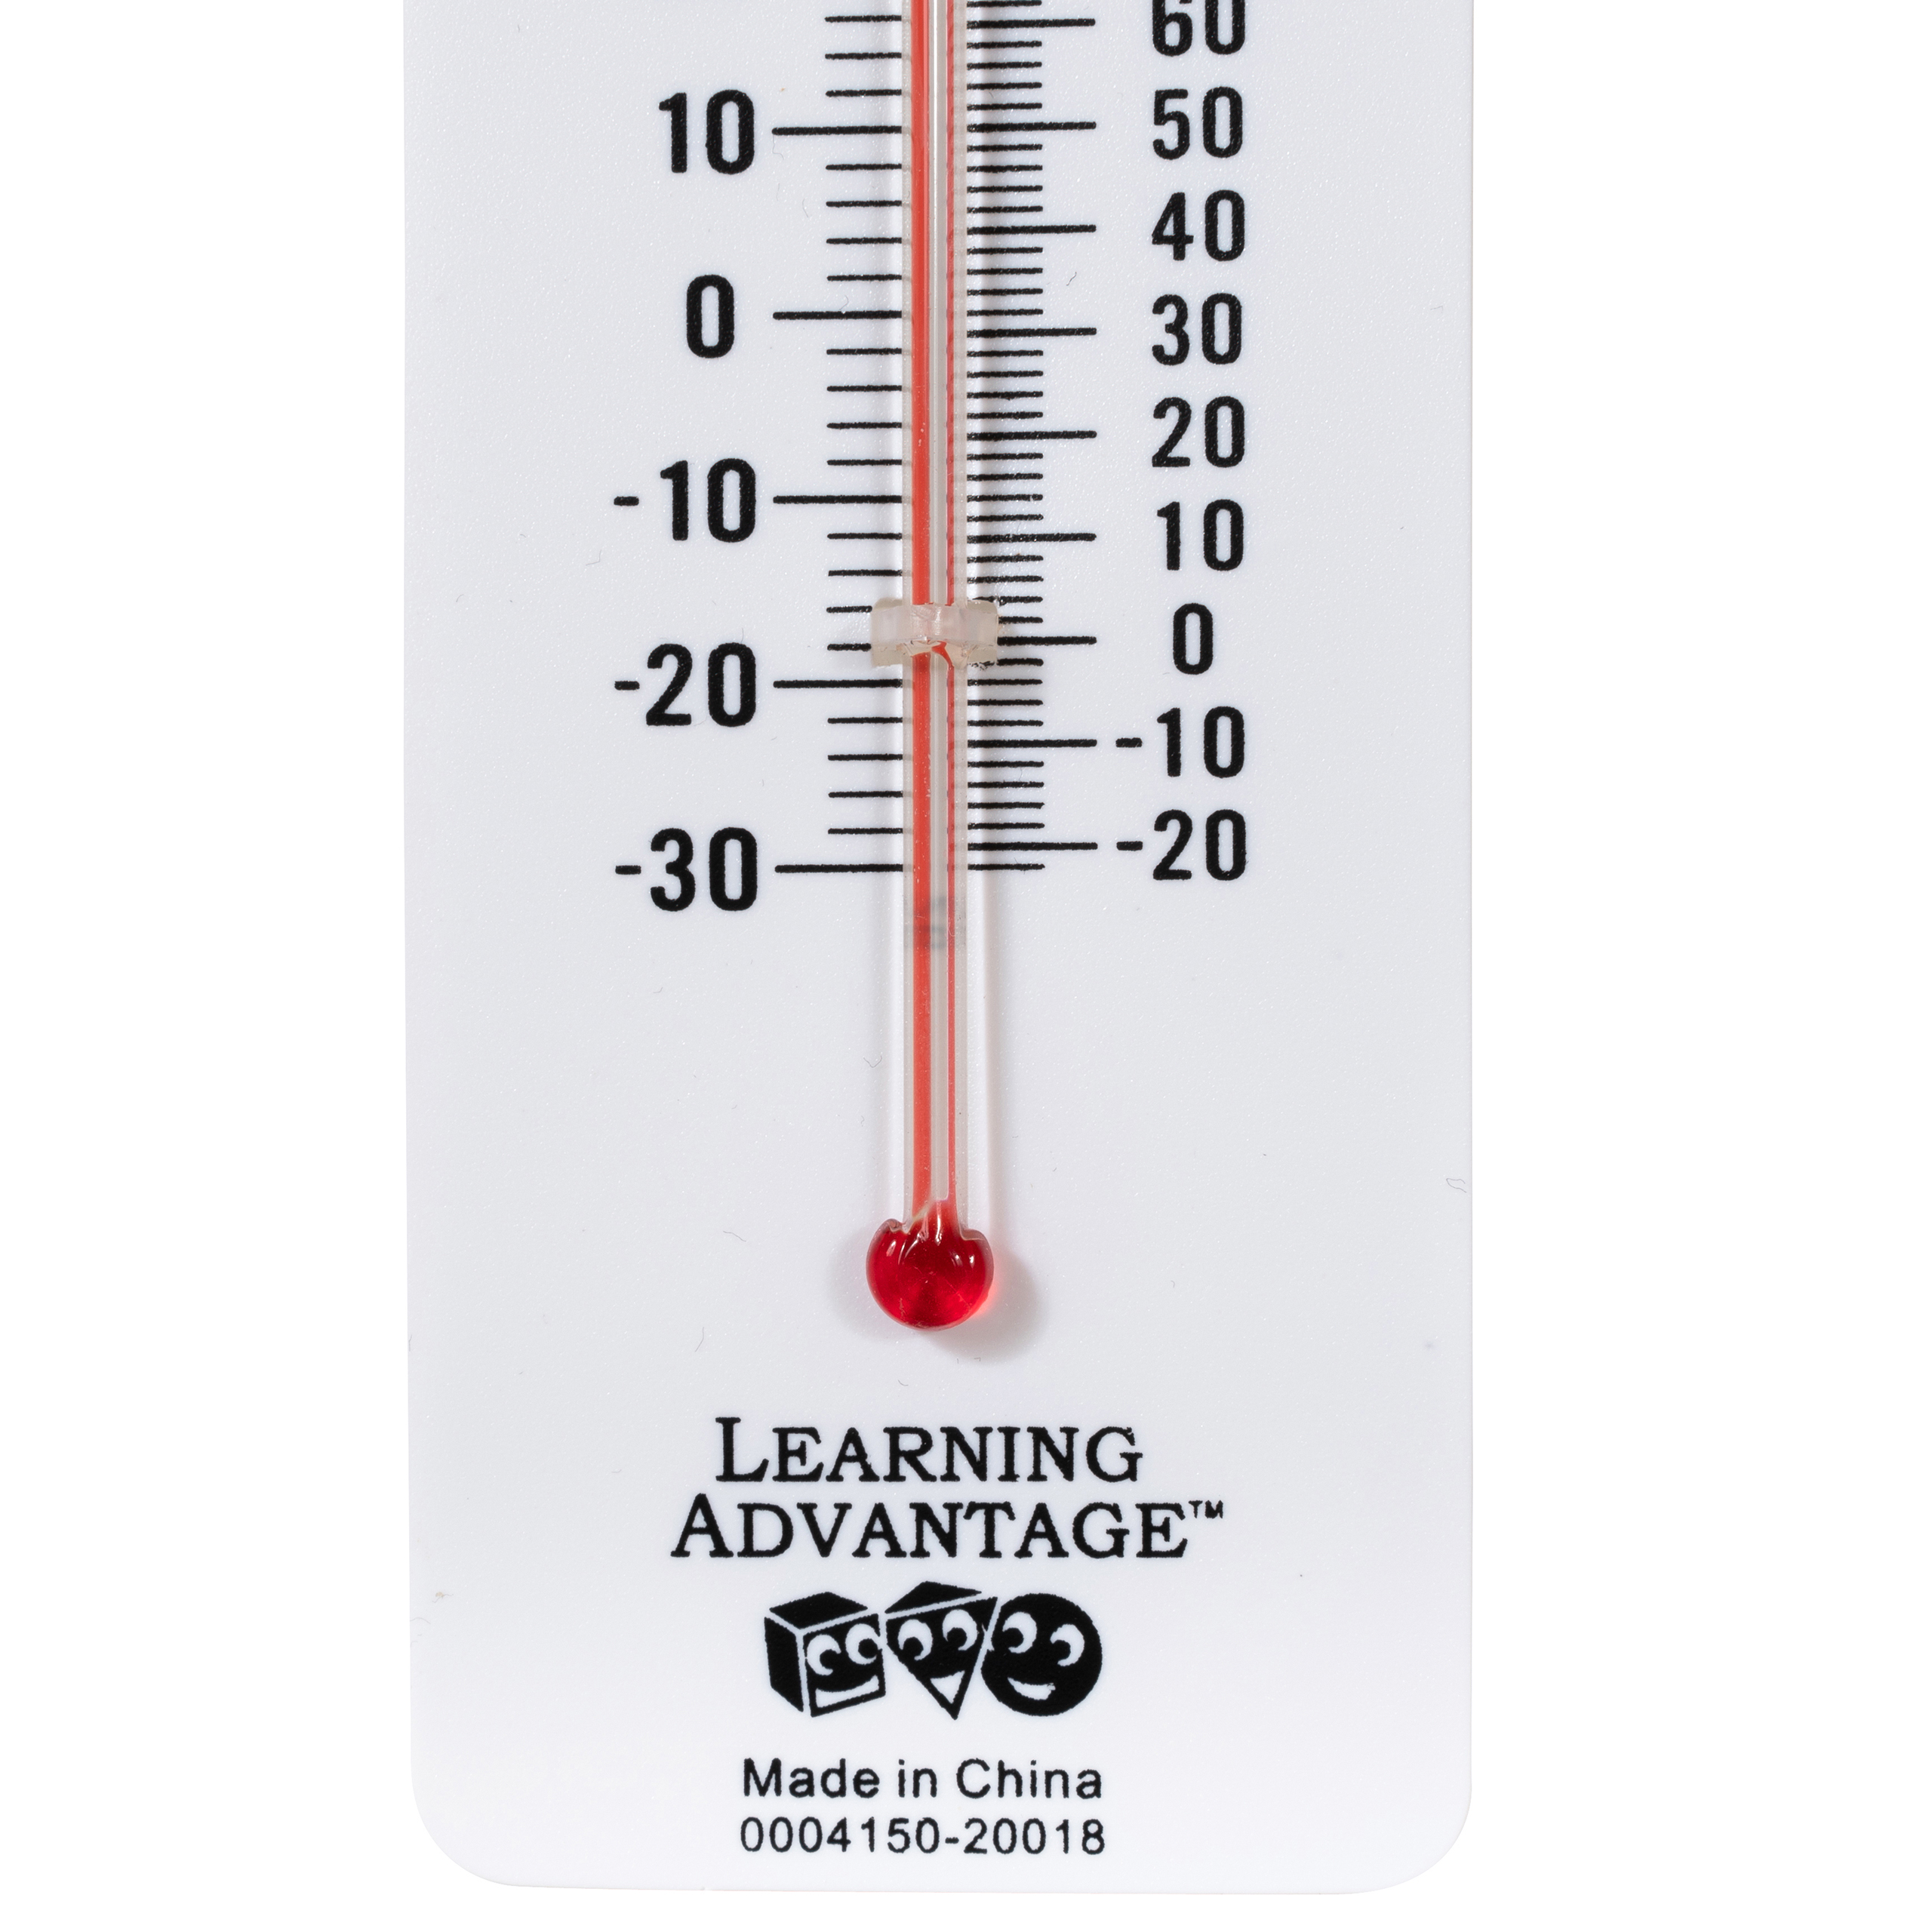 Student Thermometers - Set of 10 - image 4 of 6